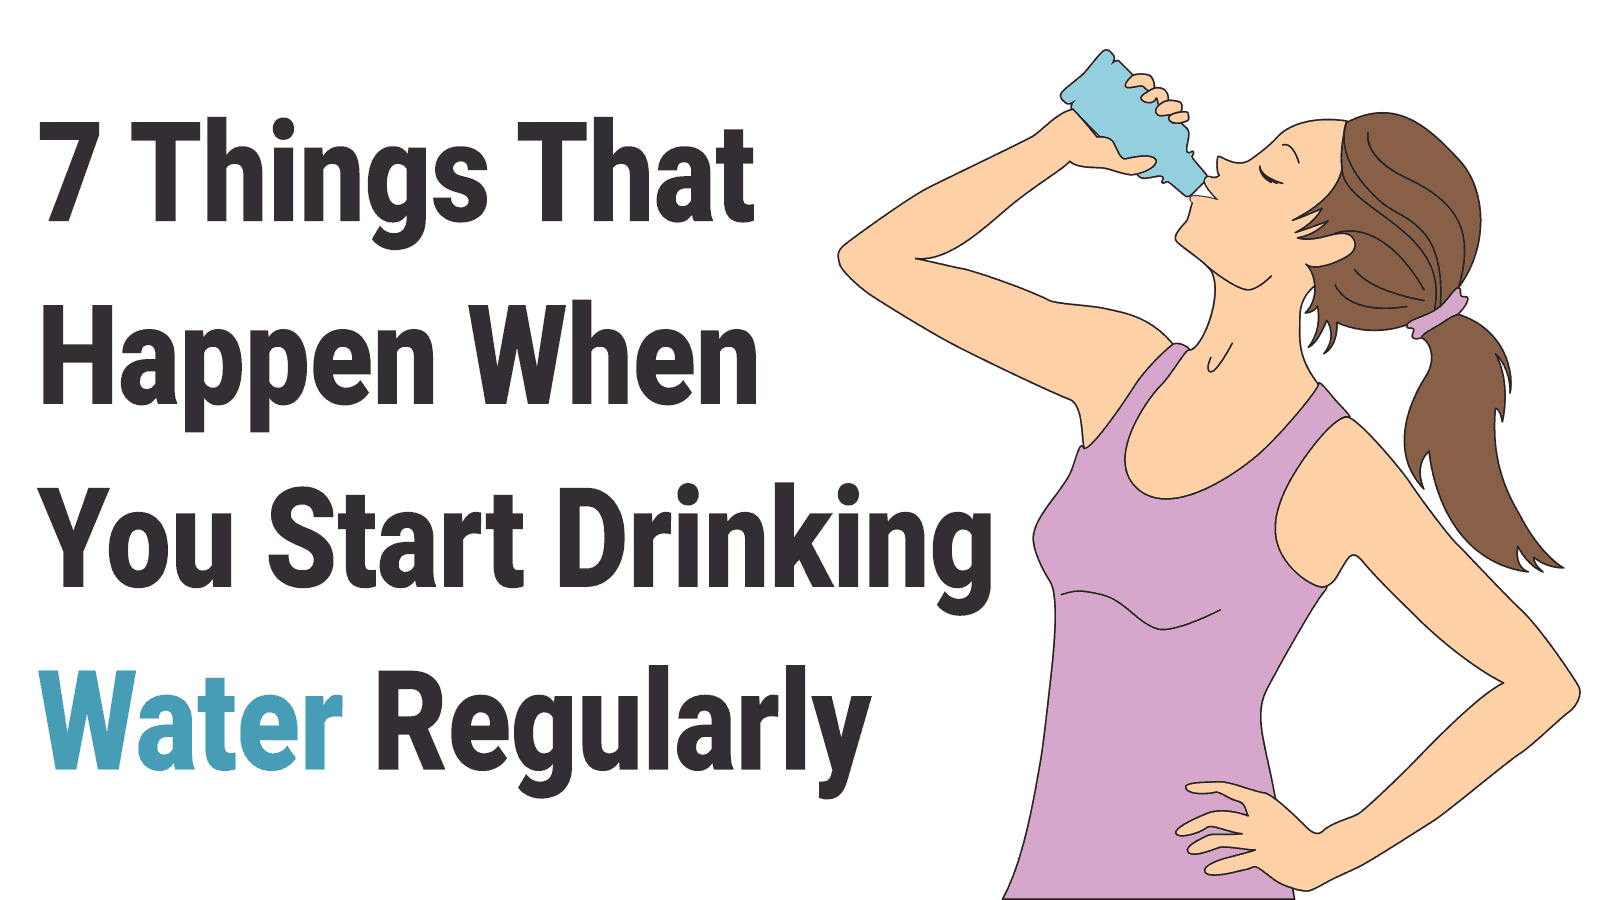 7 Things that happen when you start drinking water regularly